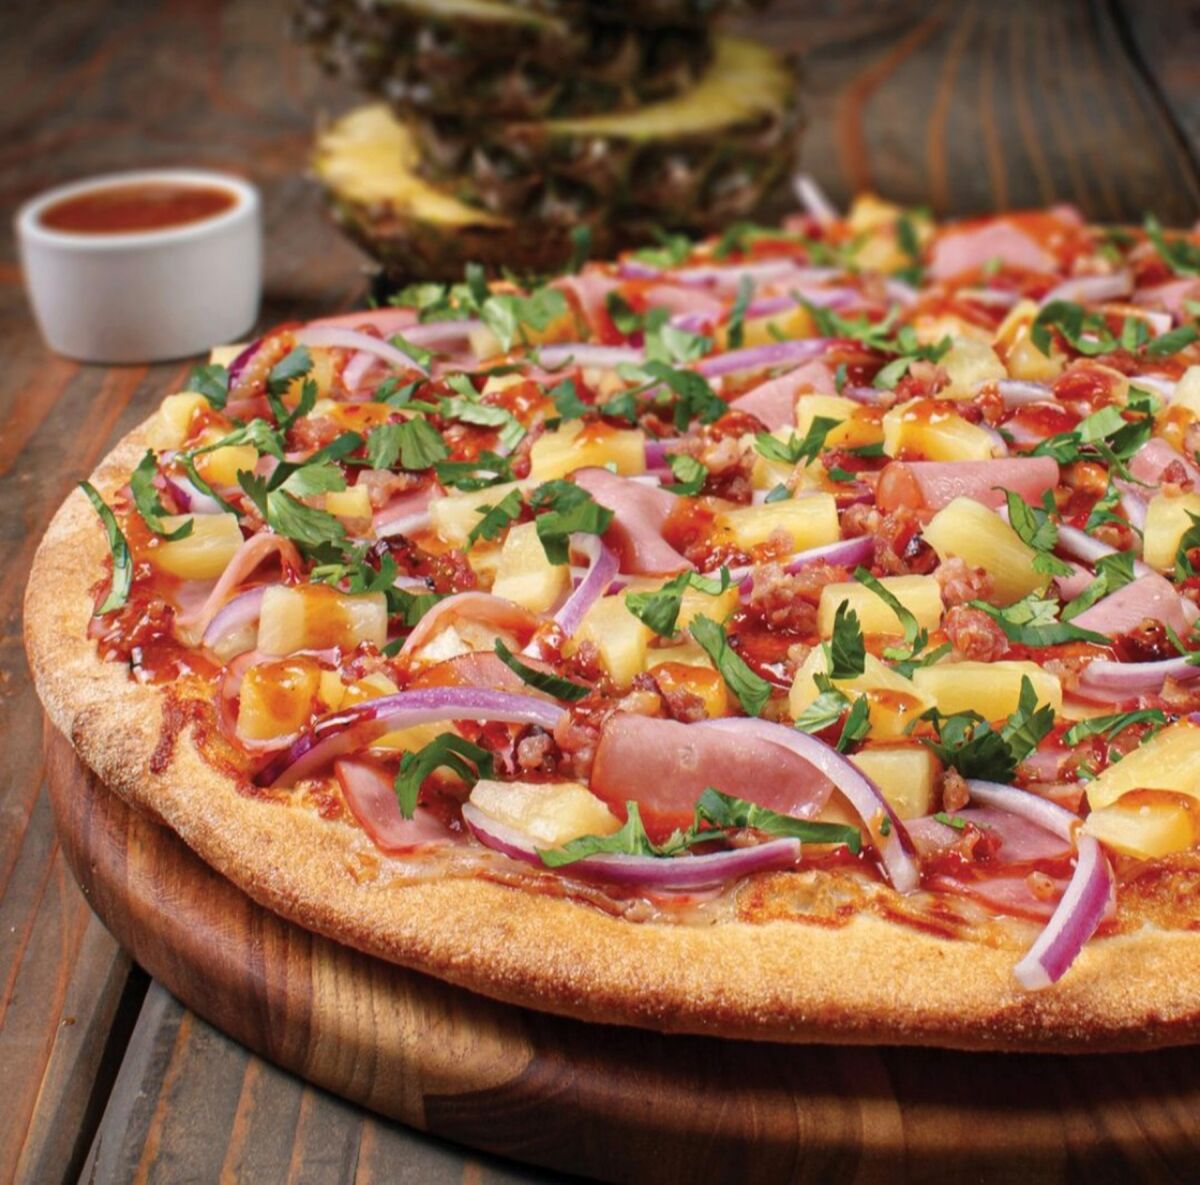 One of the specialty pizzas available is the Serrano chili pizza.